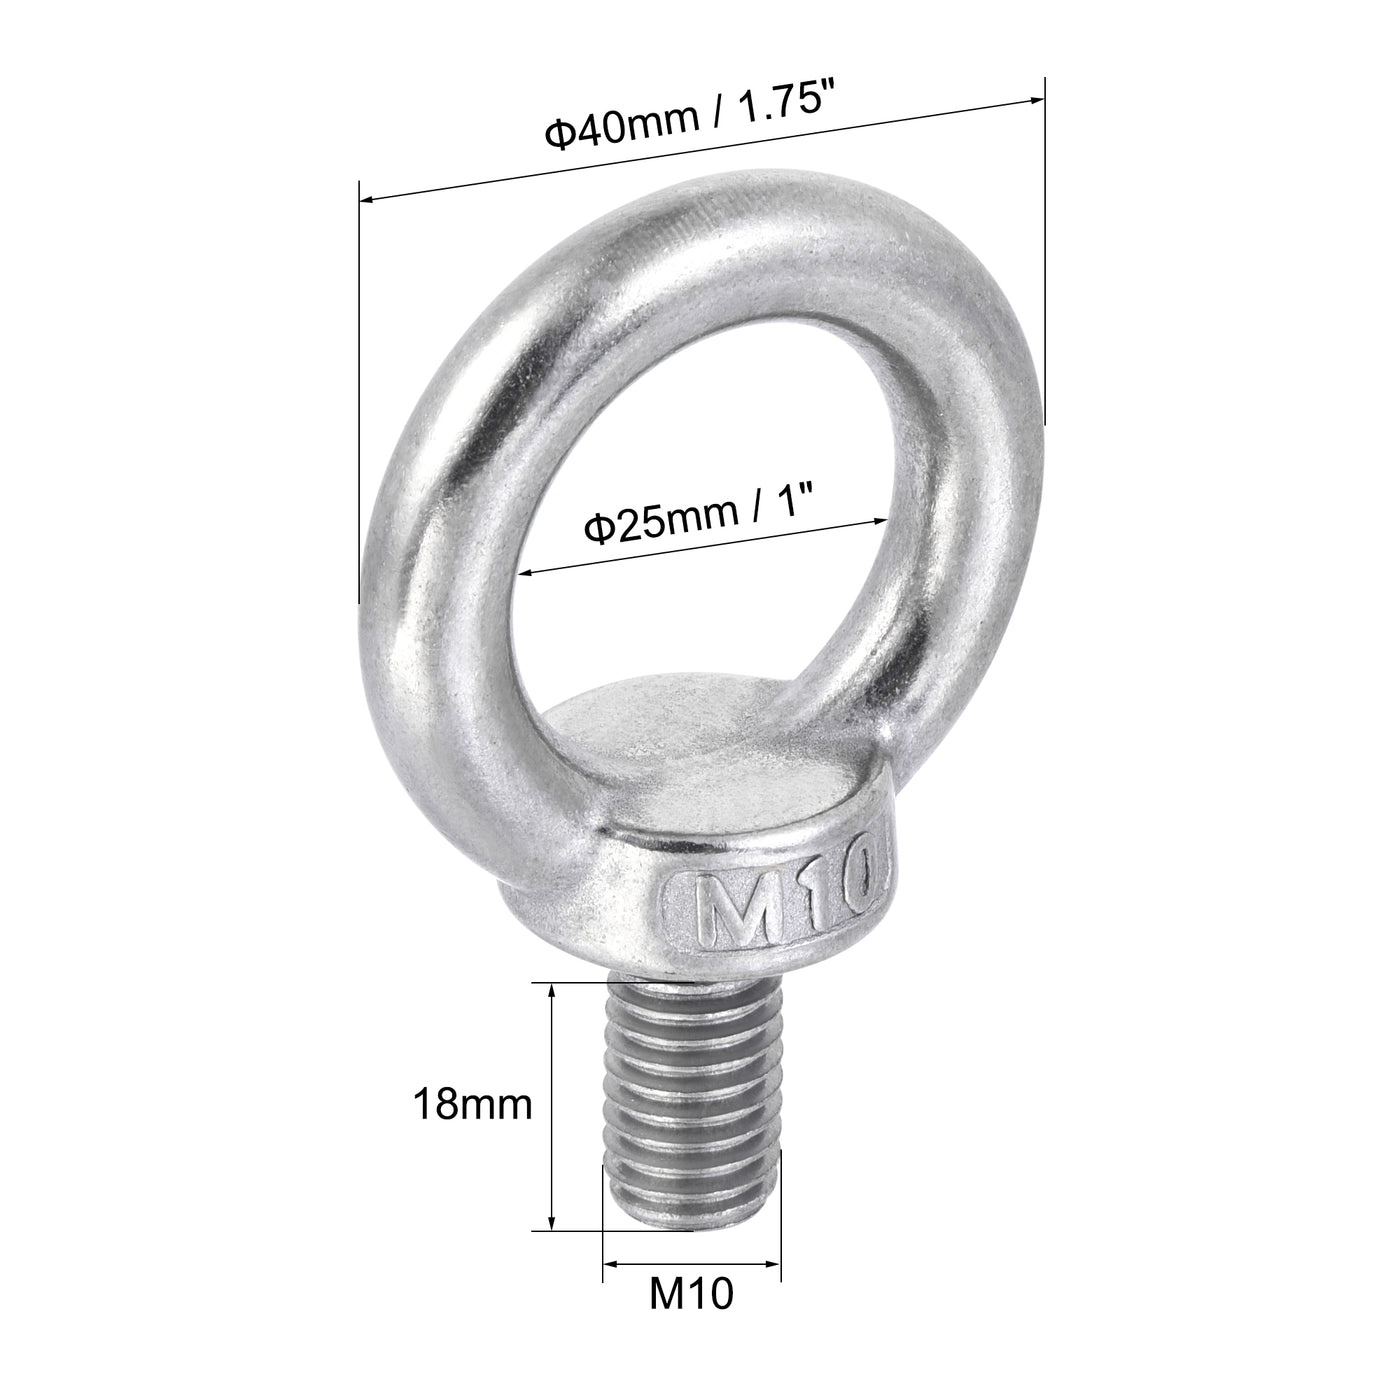 uxcell Uxcell Lifting Eye Bolt M10 x 18mm Male Thread with Hex Screw Nut Gasket Flat Washer for Hanging, 304 Stainless Steel, 2 Sets